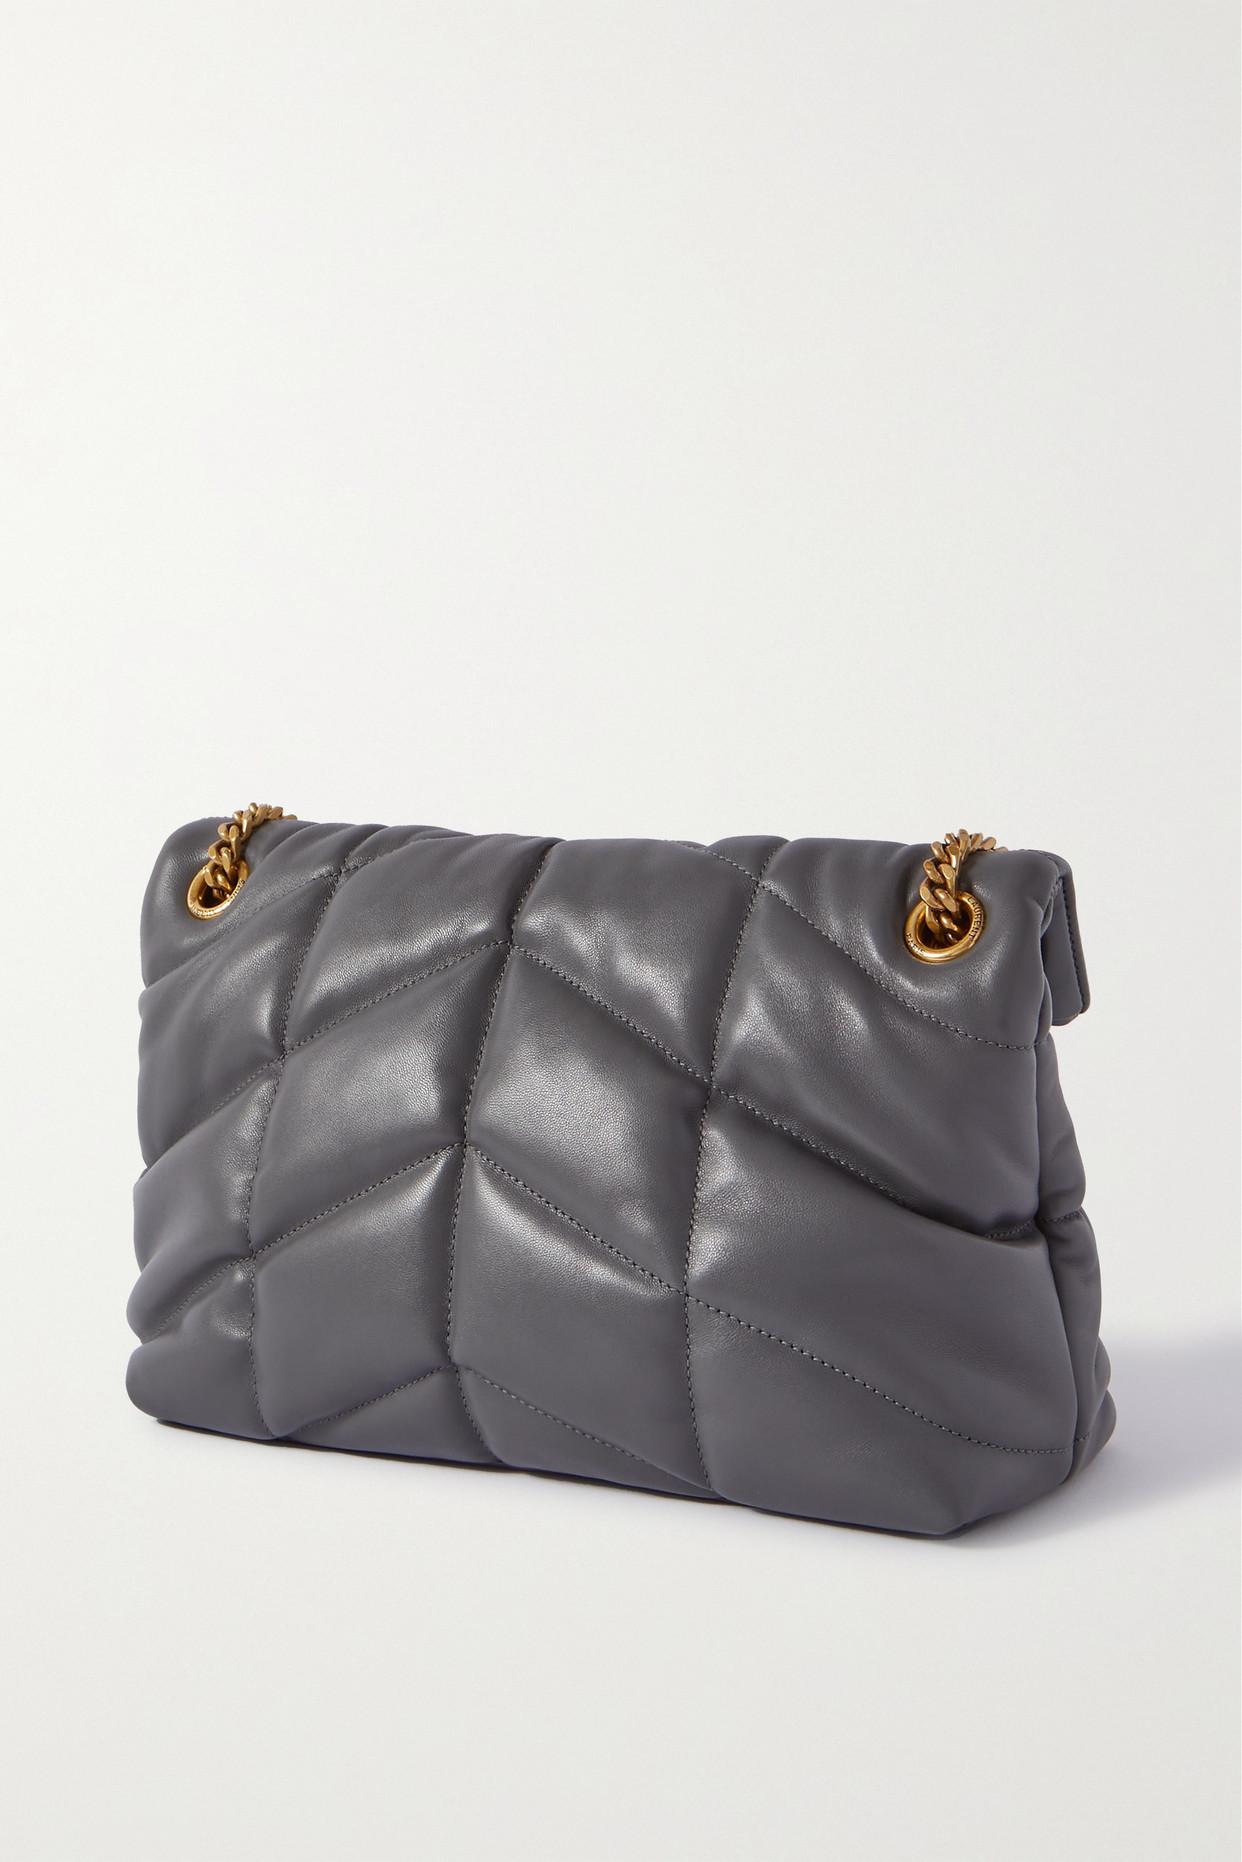 Saint Laurent Loulou Puffer Small Quilted Leather Shoulder Bag in Gray |  Lyst